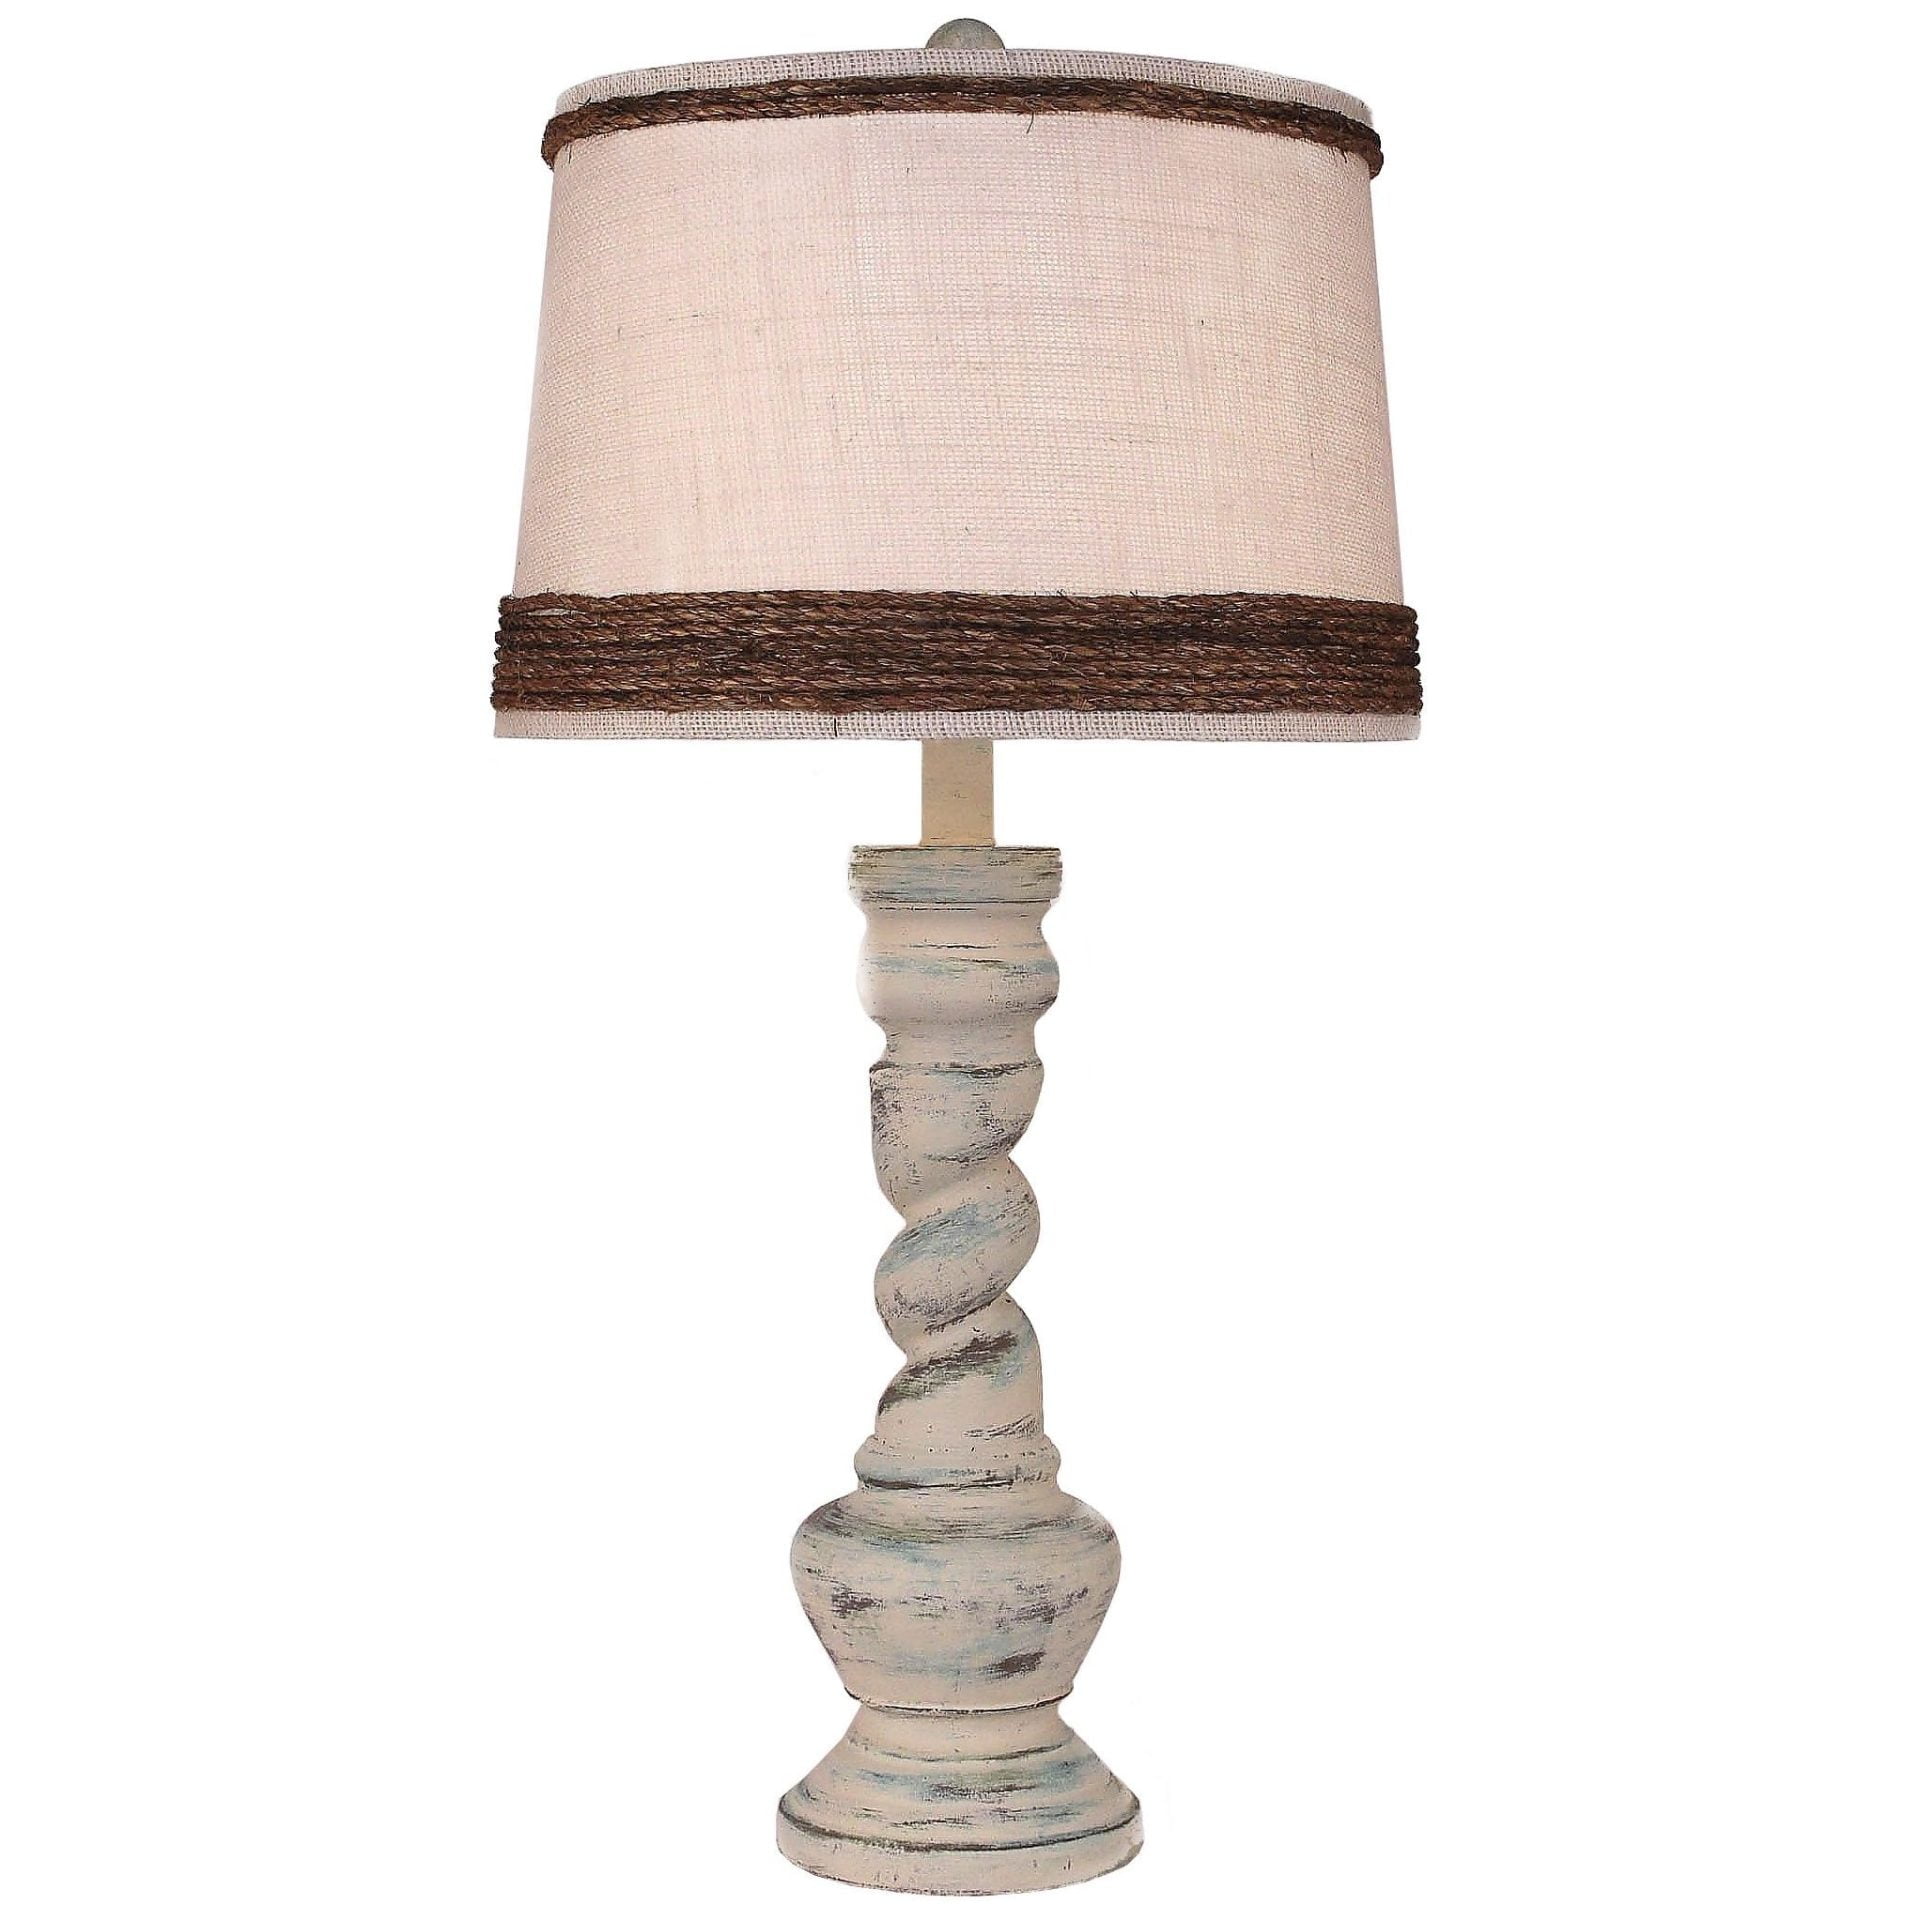 Country Twist Table Lamp